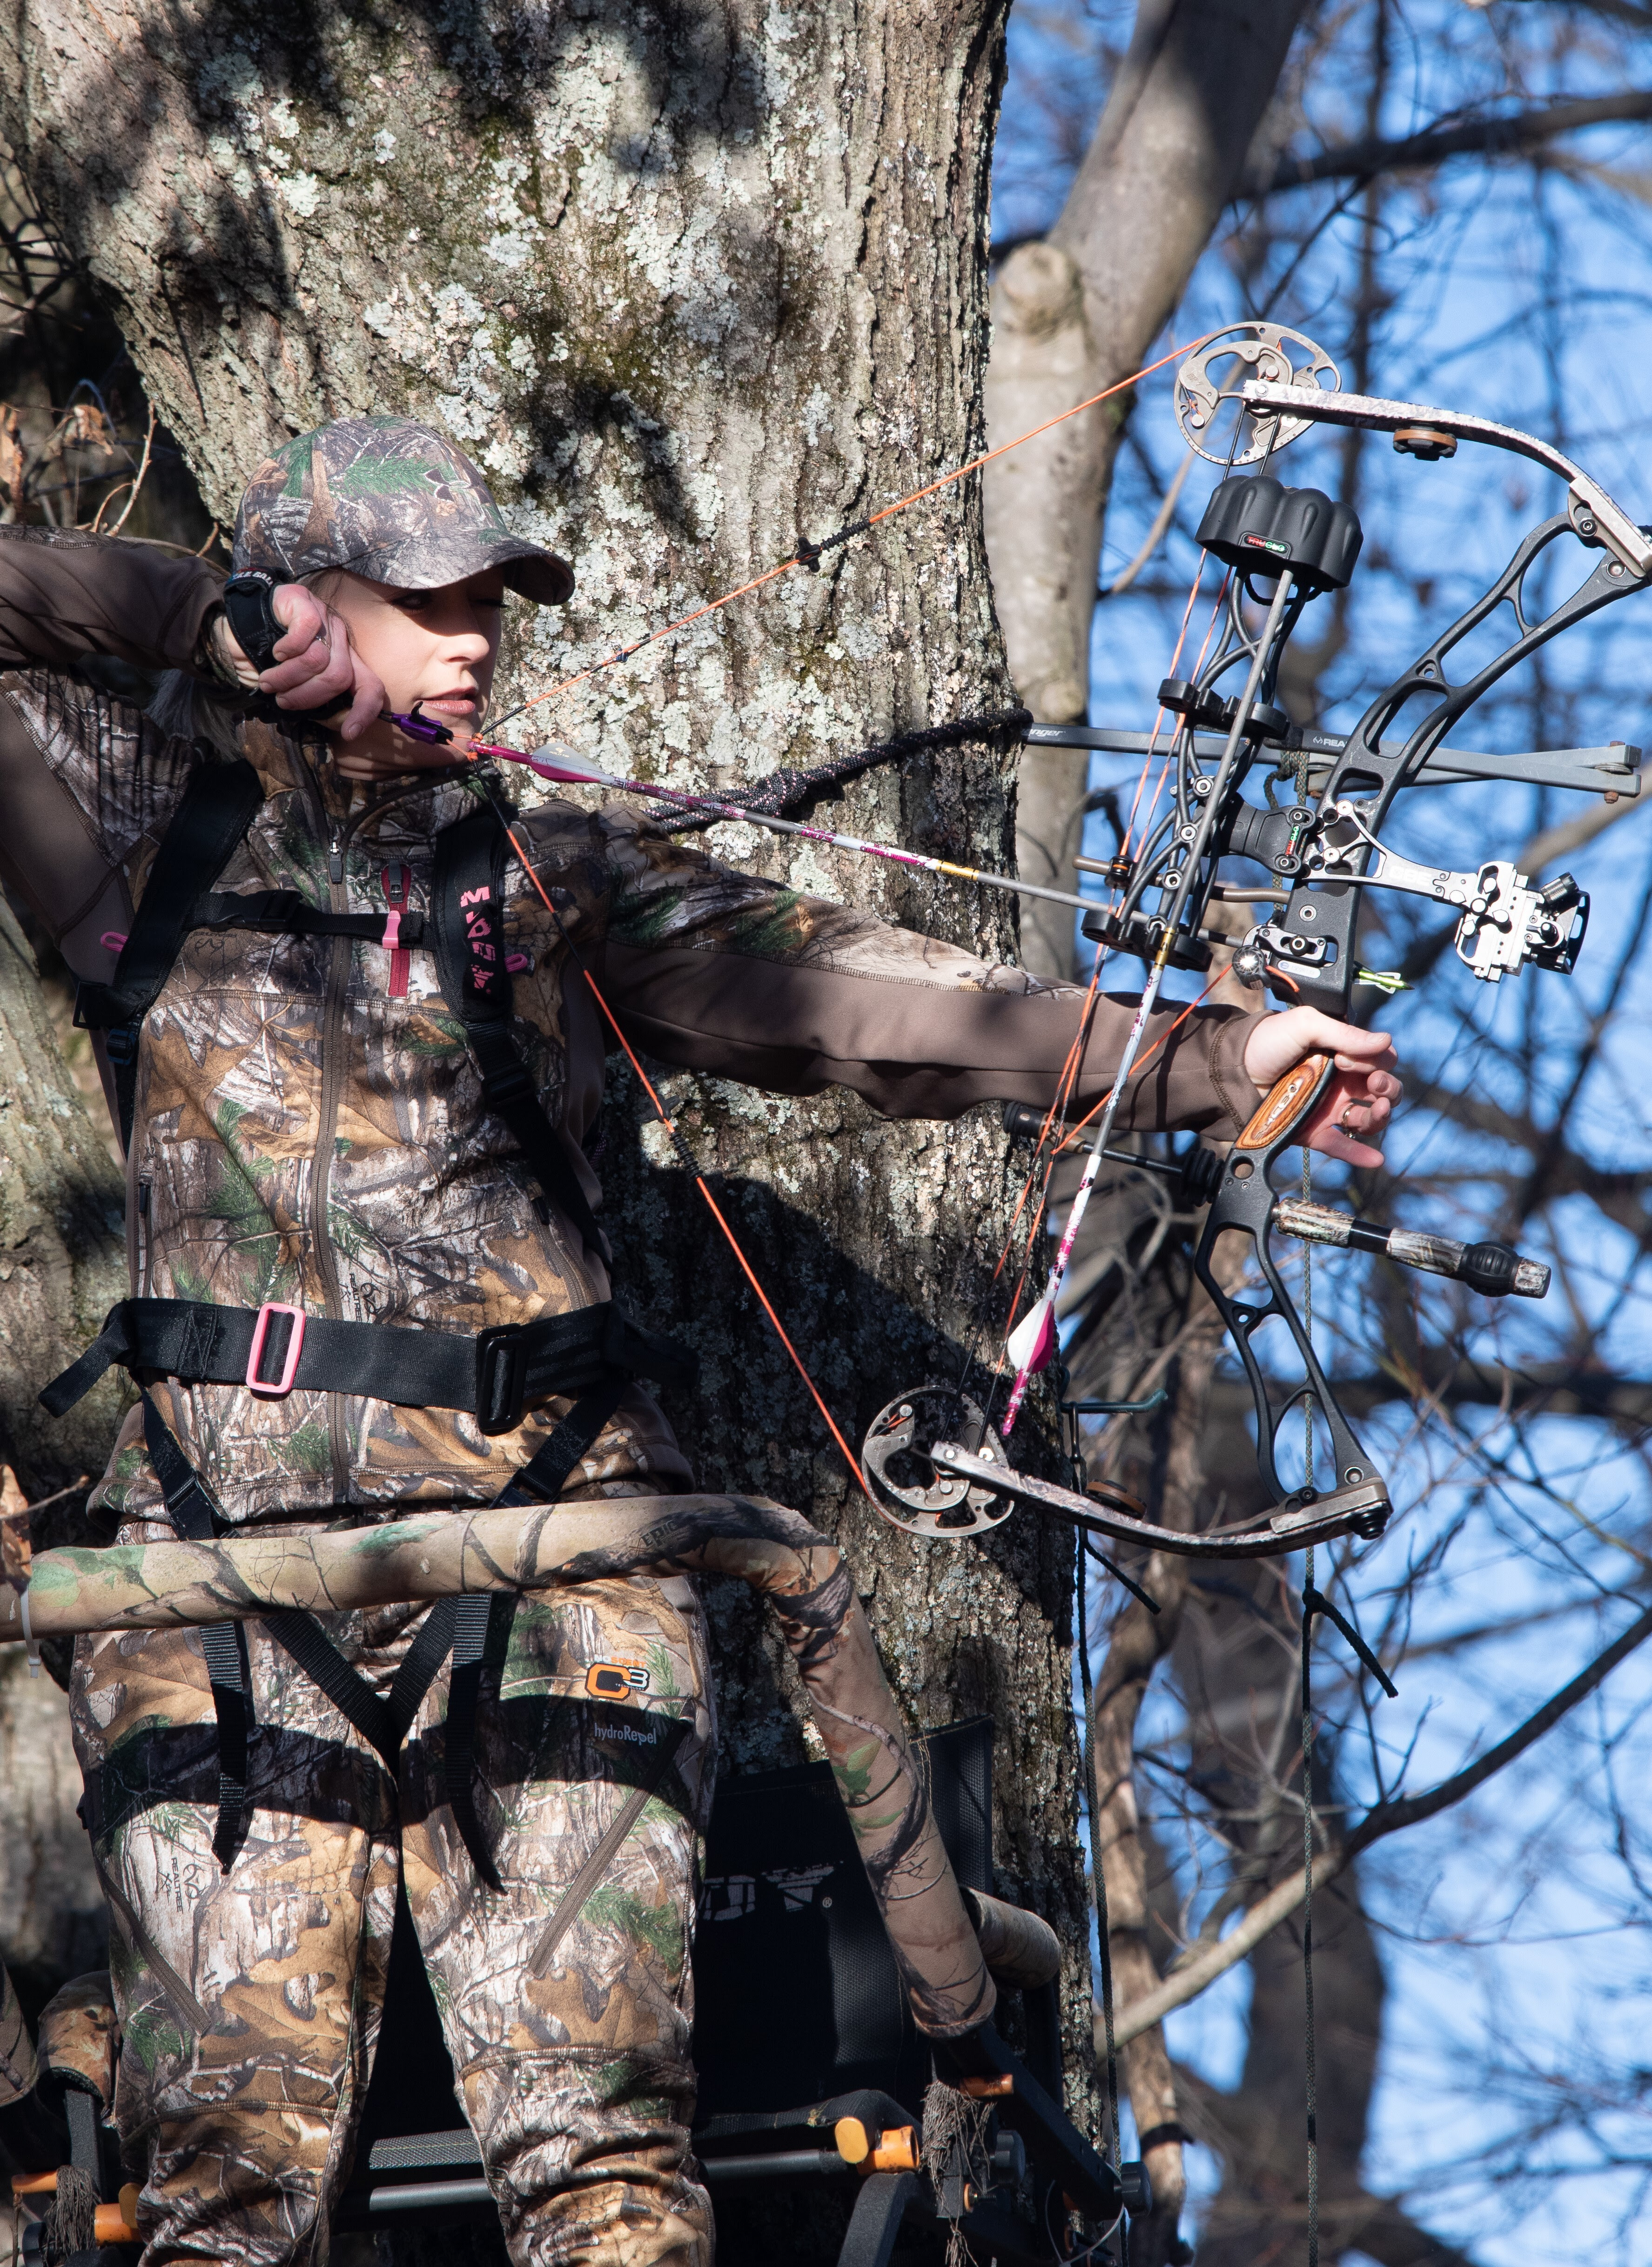 Celebrate National Hunting and Fishing Day on Saturday, Sept. 25 with the start of Ohio’s deer-archery hunting season.